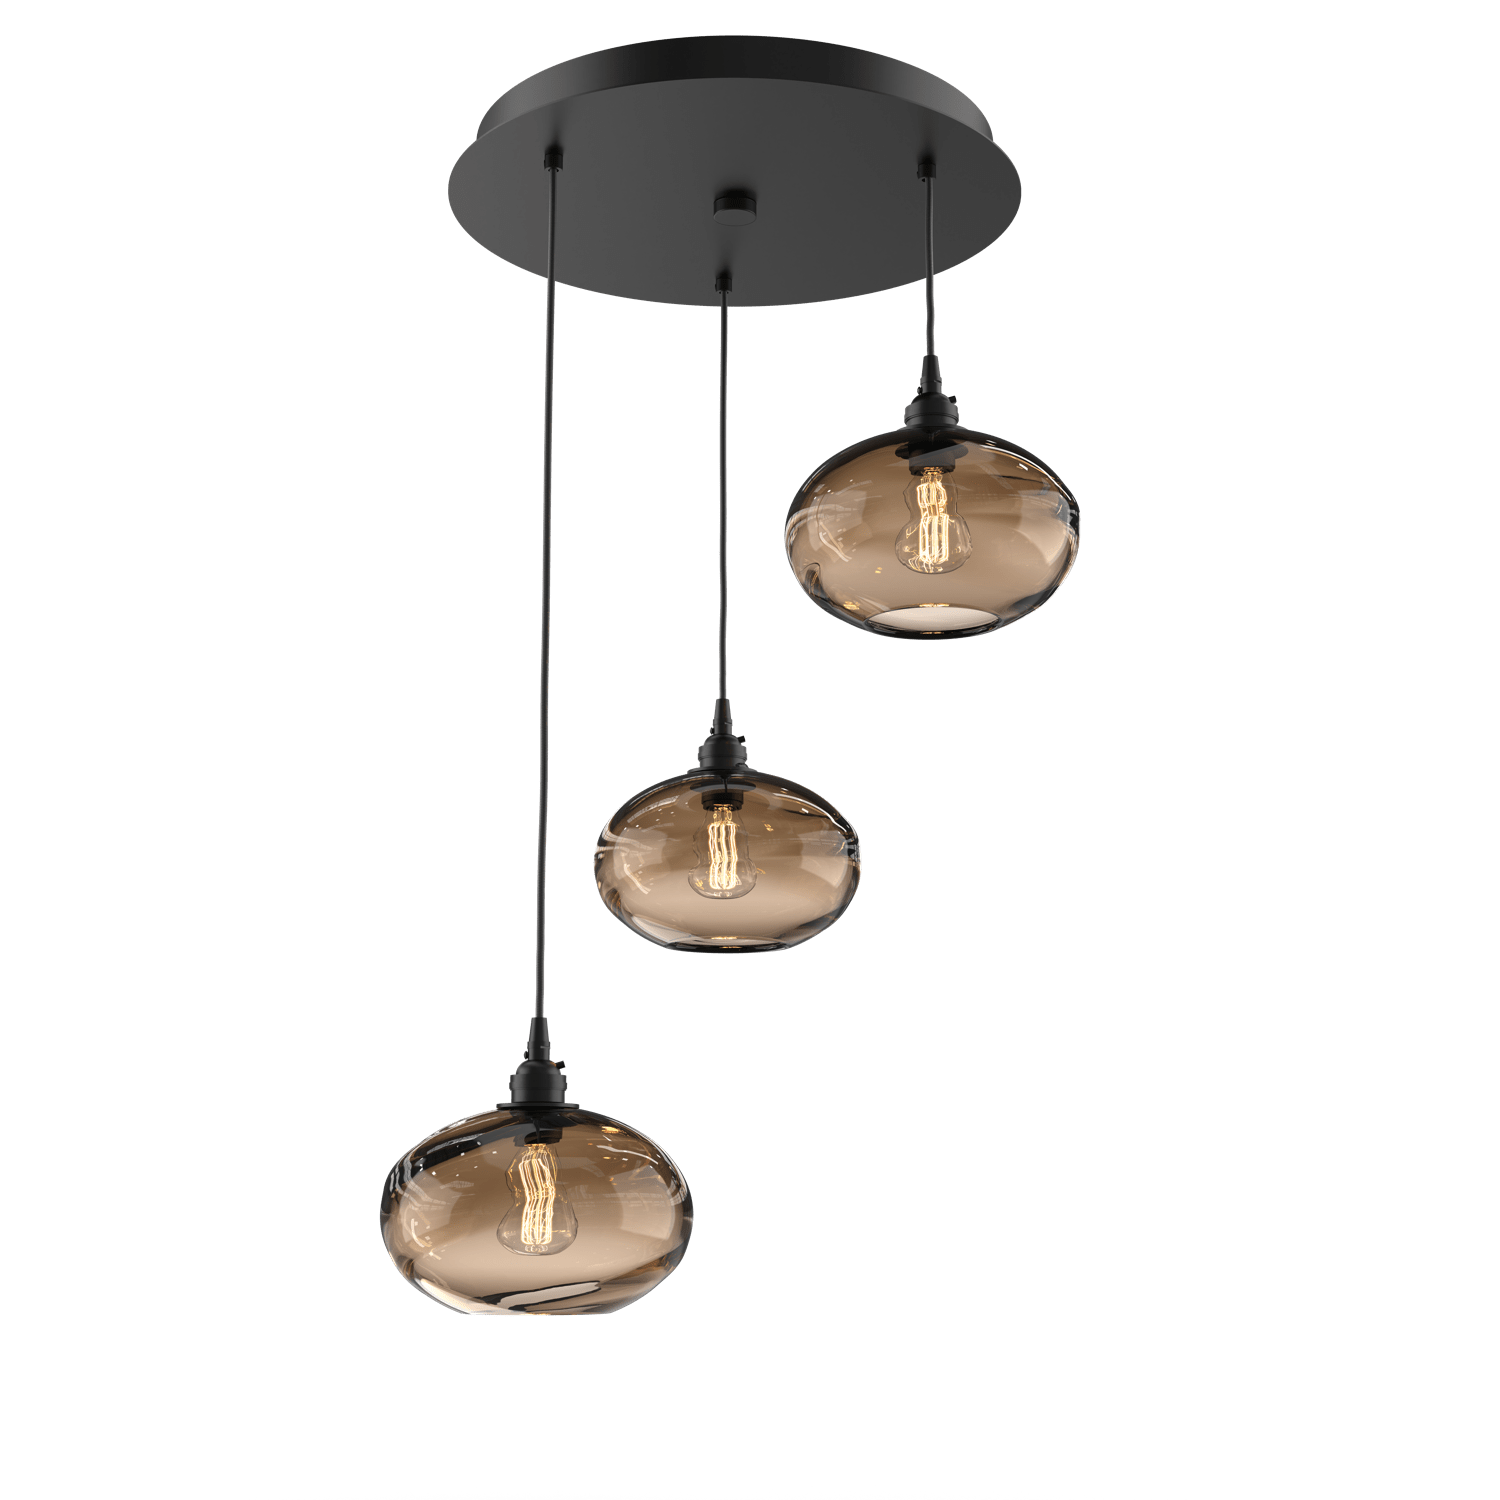 CHB0036-03-MB-OB-Hammerton-Studio-Optic-Blown-Glass-Coppa-3-light-round-pendant-chandelier-with-matte-black-finish-and-optic-bronze-blown-glass-shades-and-incandescent-lamping